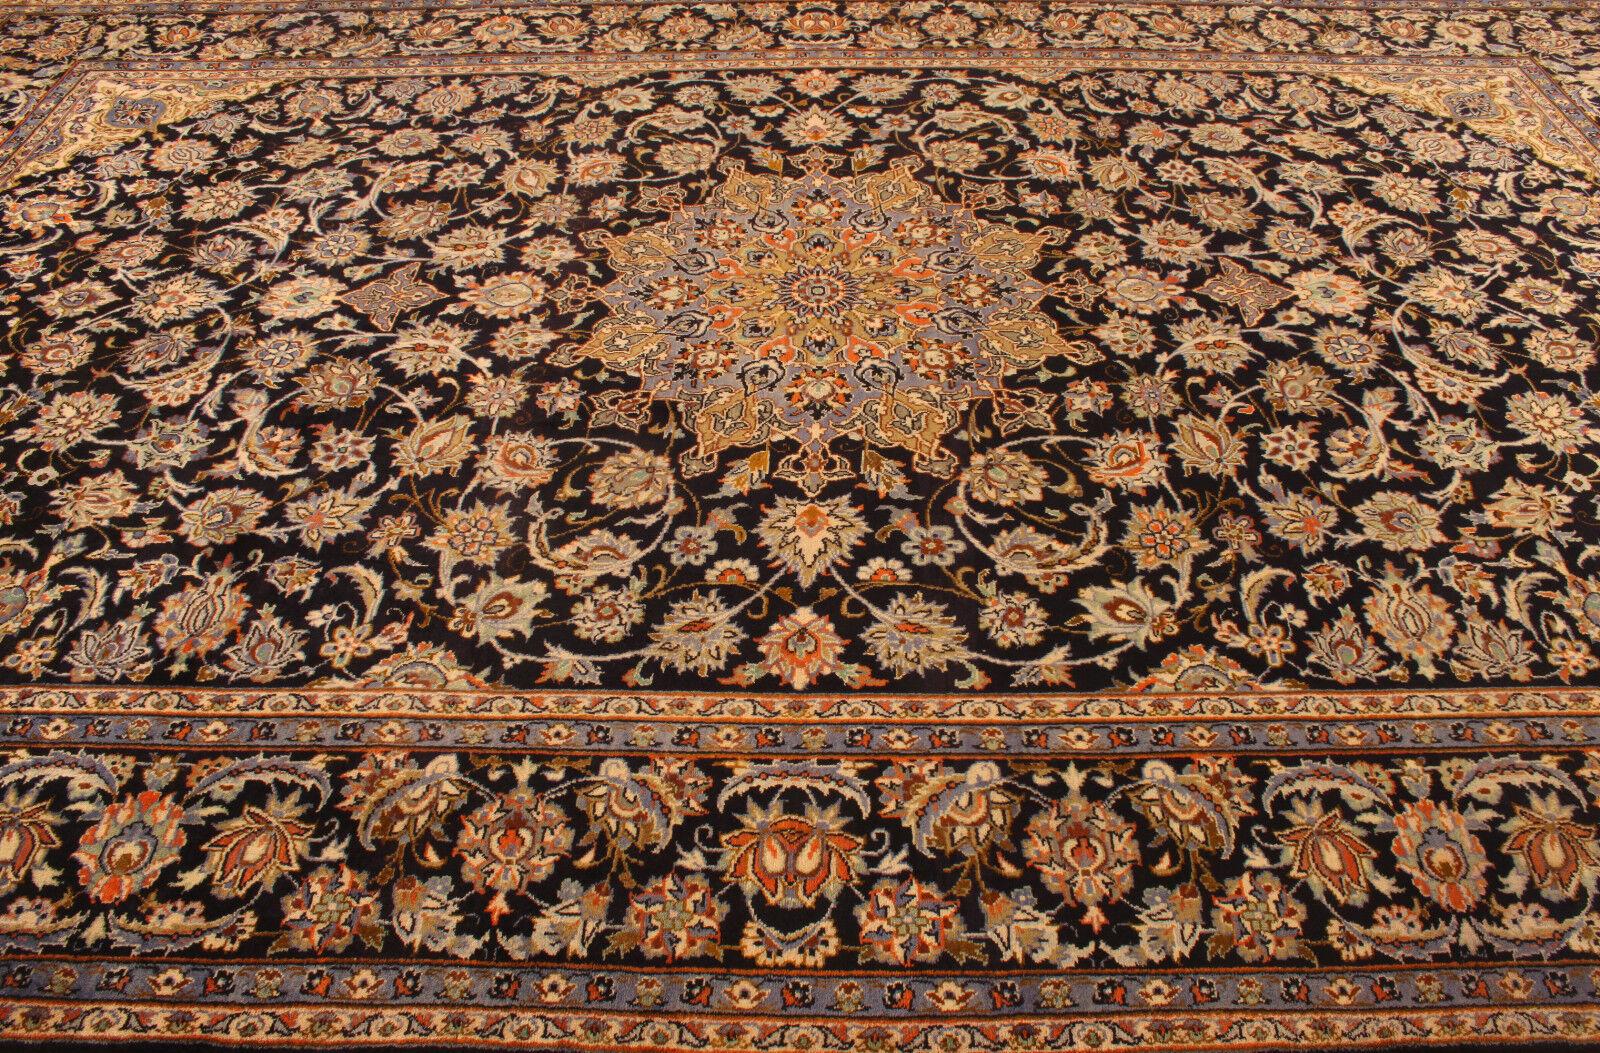 Handmade Vintage Persian Style Tabriz Rug 9.5' x 14.5', 1970s - 1T35 For Sale 2